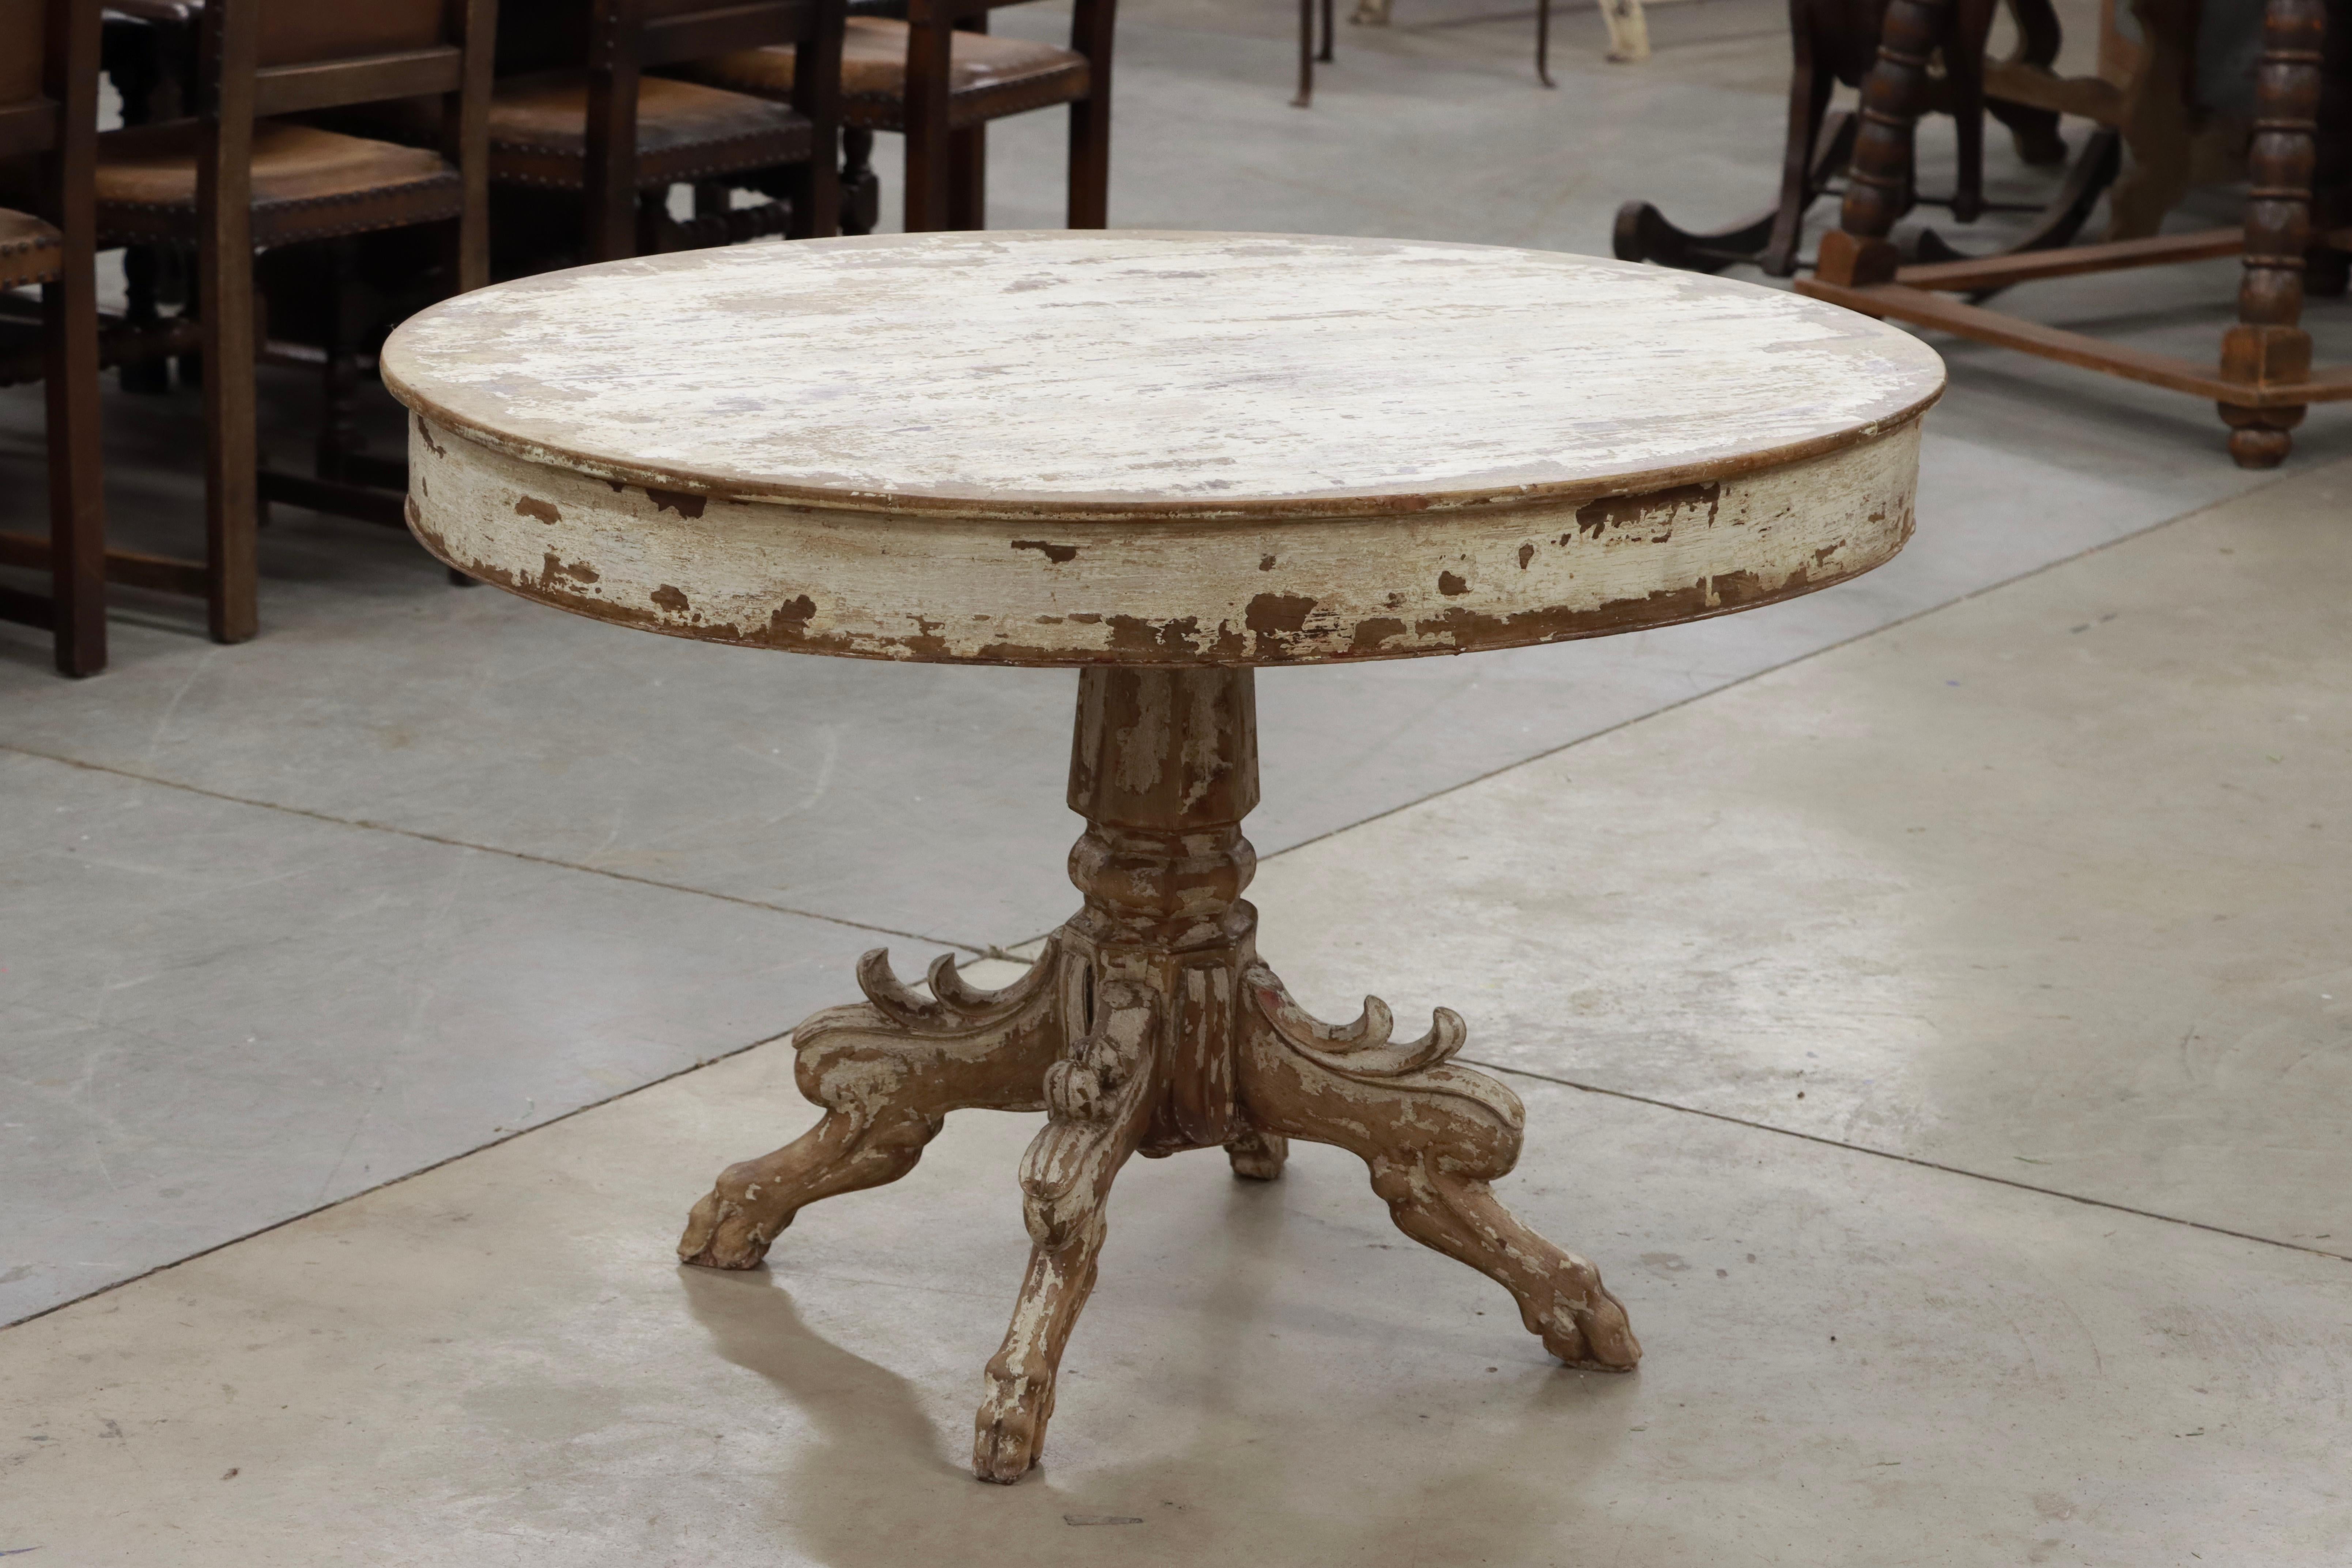 Antique French Renaissance Revival oval walnut centre table. The solid plank top is supported by a simple edged apron. The central baluster has four legs carved with acanthus leaves . 

The overall unpretentious look of the table with its distressed